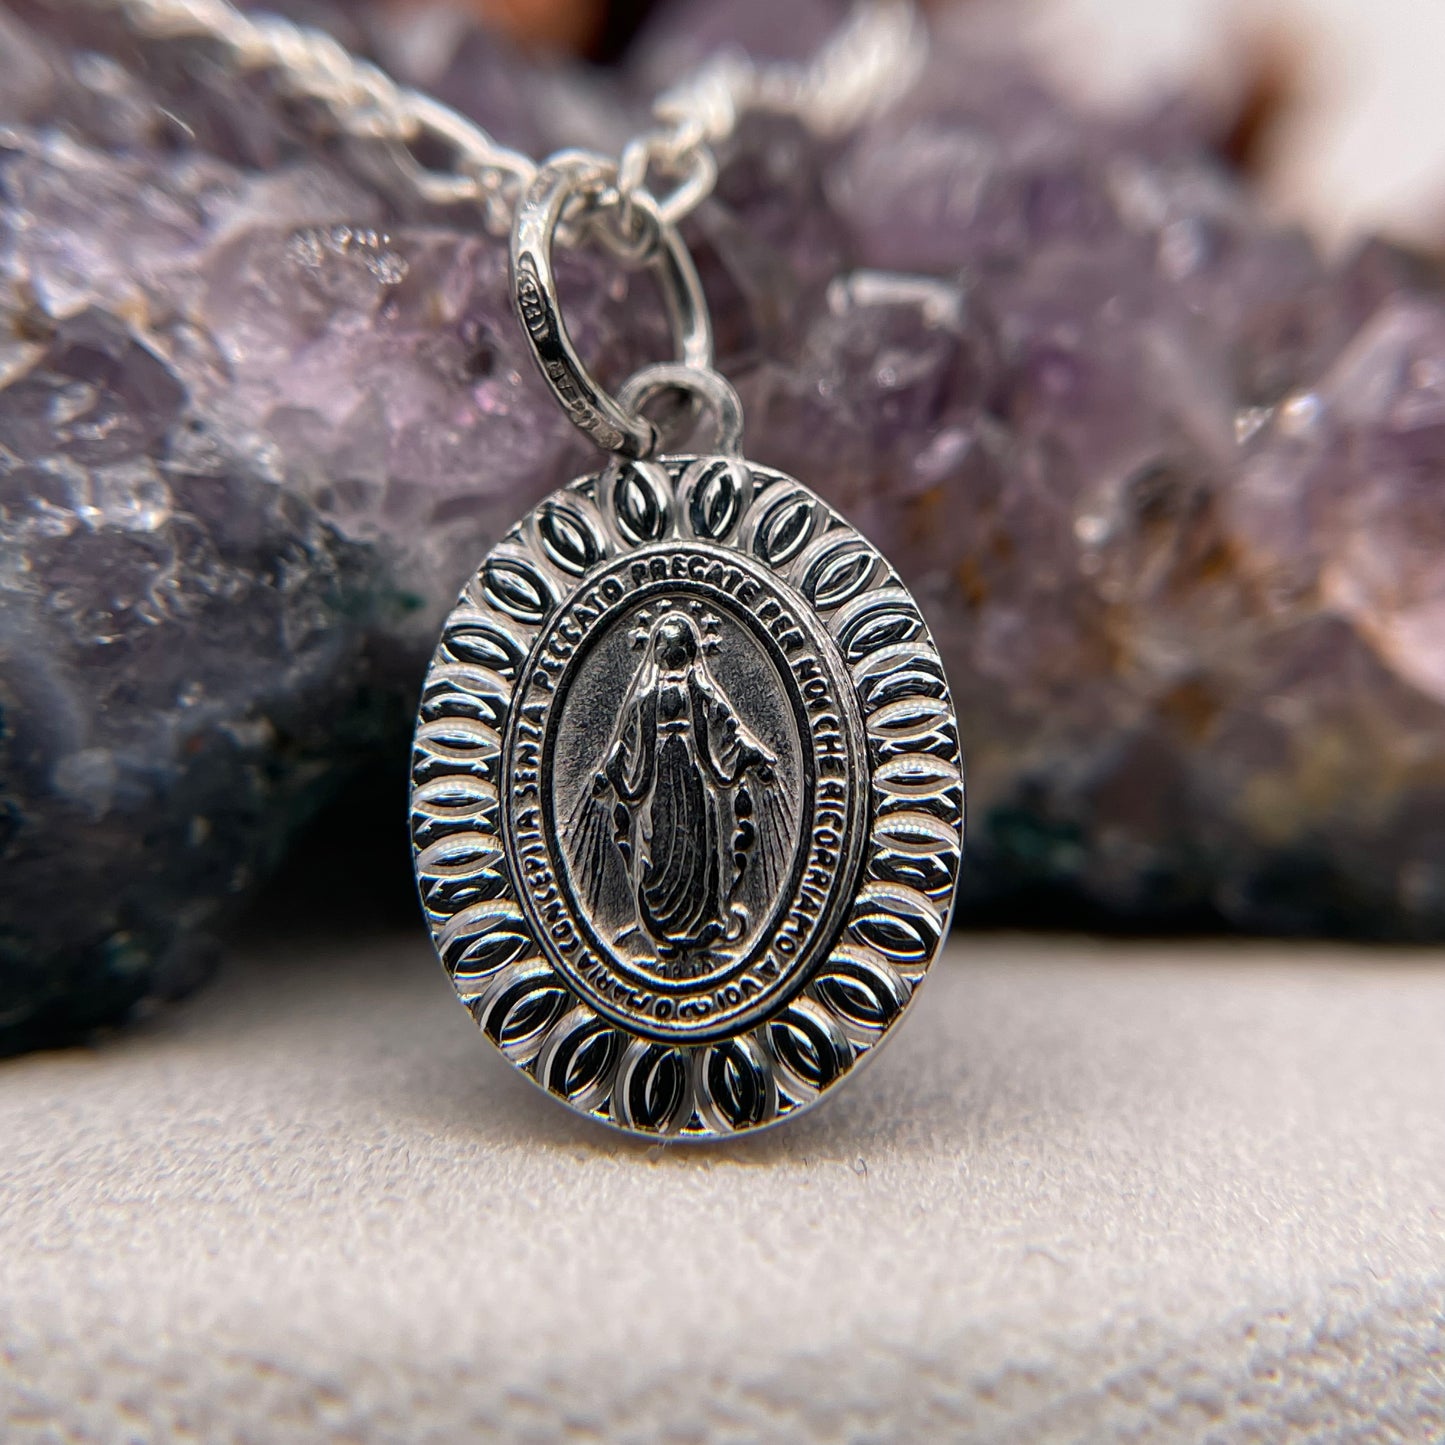 Virgin Mary Silver Pendant 925 Sterling Silver Virgin Mary Necklace